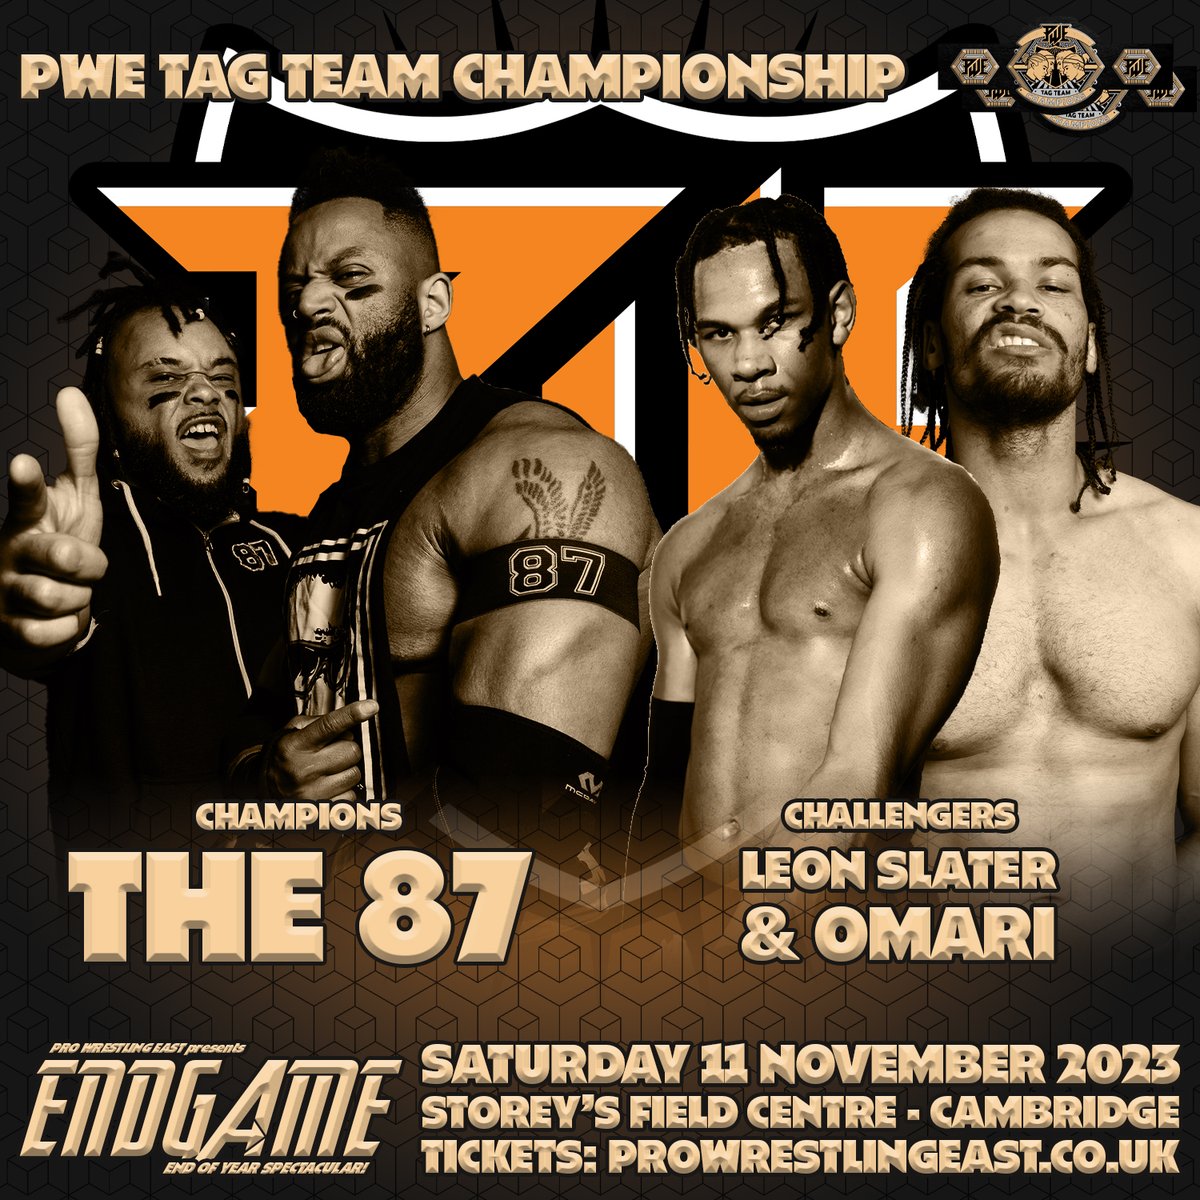 EARLY BIRD TICKETS FOR #ENDGAME! As it's coming a mere six weeks after #Jackpot, for JUST THIS WEEK tickets are £15 instead of £18. real-records.co.uk/east/product/e… @RoyJohnsonYeah & @A_Roth7 defend their newly won PWE Tag Team titles against the debuting @OmariM4x2 and @LEONSLATER_!